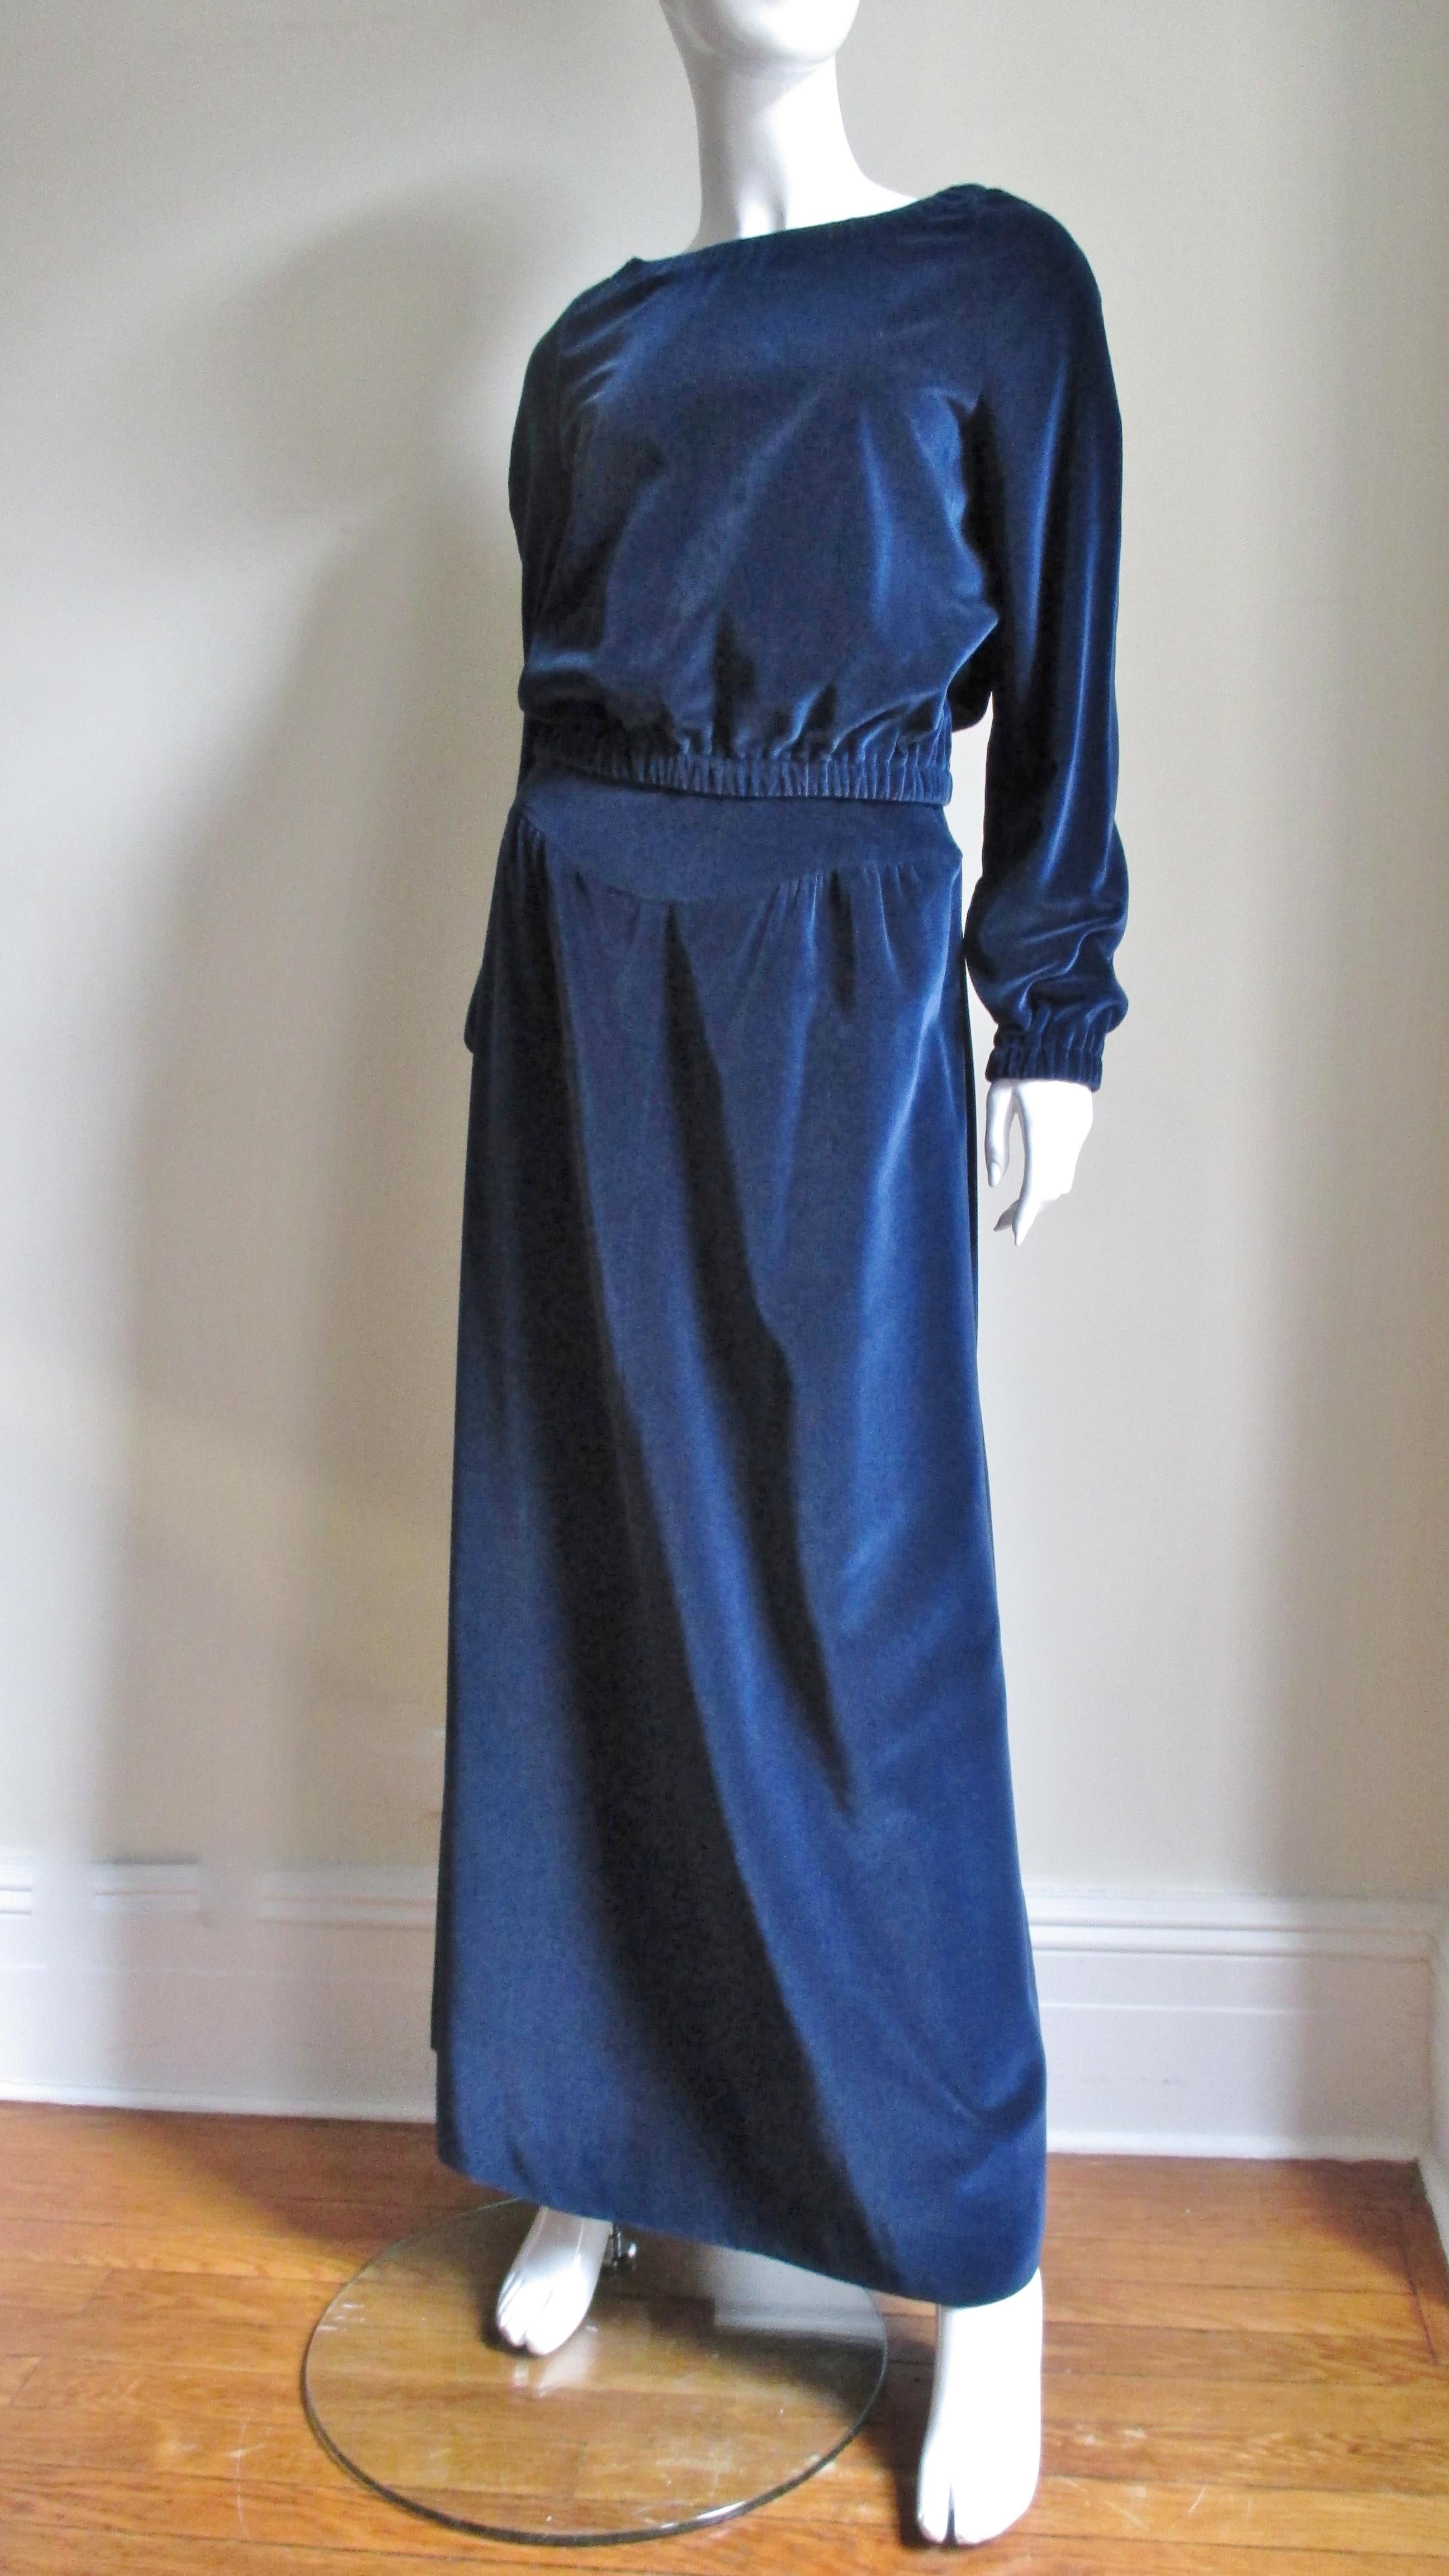 A fabulous 2 piece blue velvet skirt and top set from Courreges.  The maxi skirt is gathered onto a front and back yoke and flares subtly to the hem. The bateau neck blouson top has stretch at raglan sleeve wrists, waist and neckline and can be worn